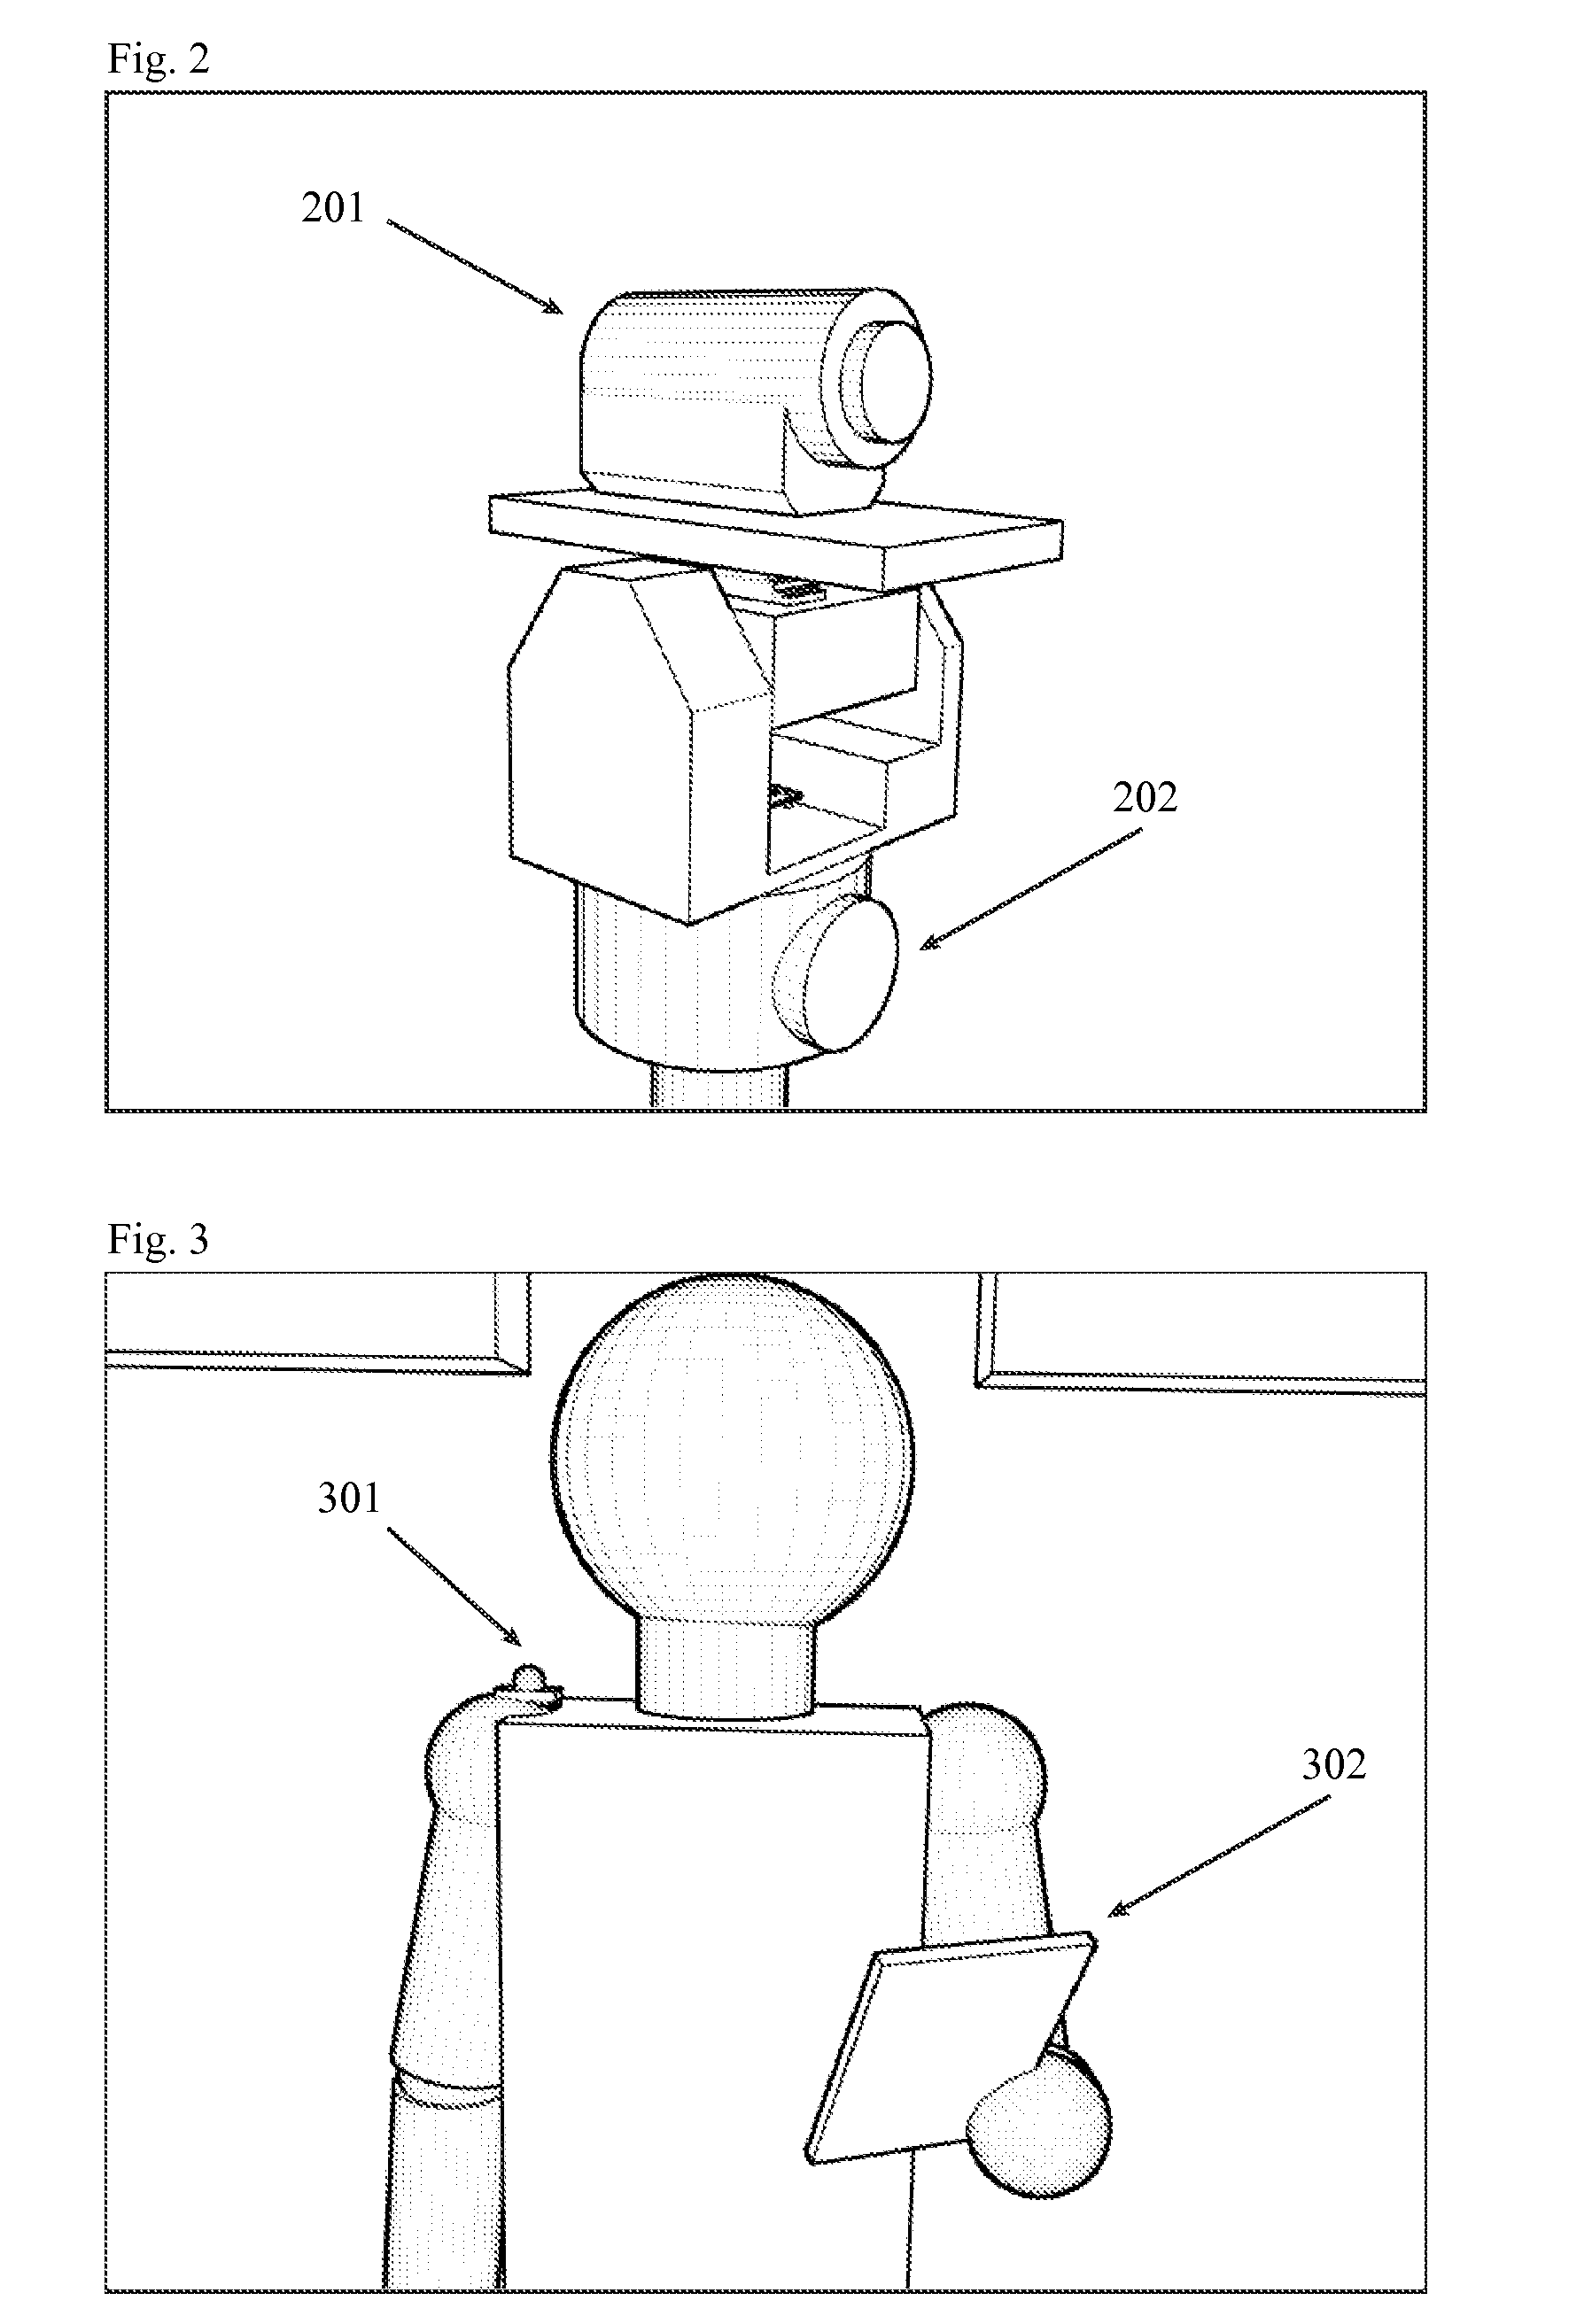 System and method of semi-autonomous multimedia presentation creation, recording, display, network streaming, website addition, and playback.